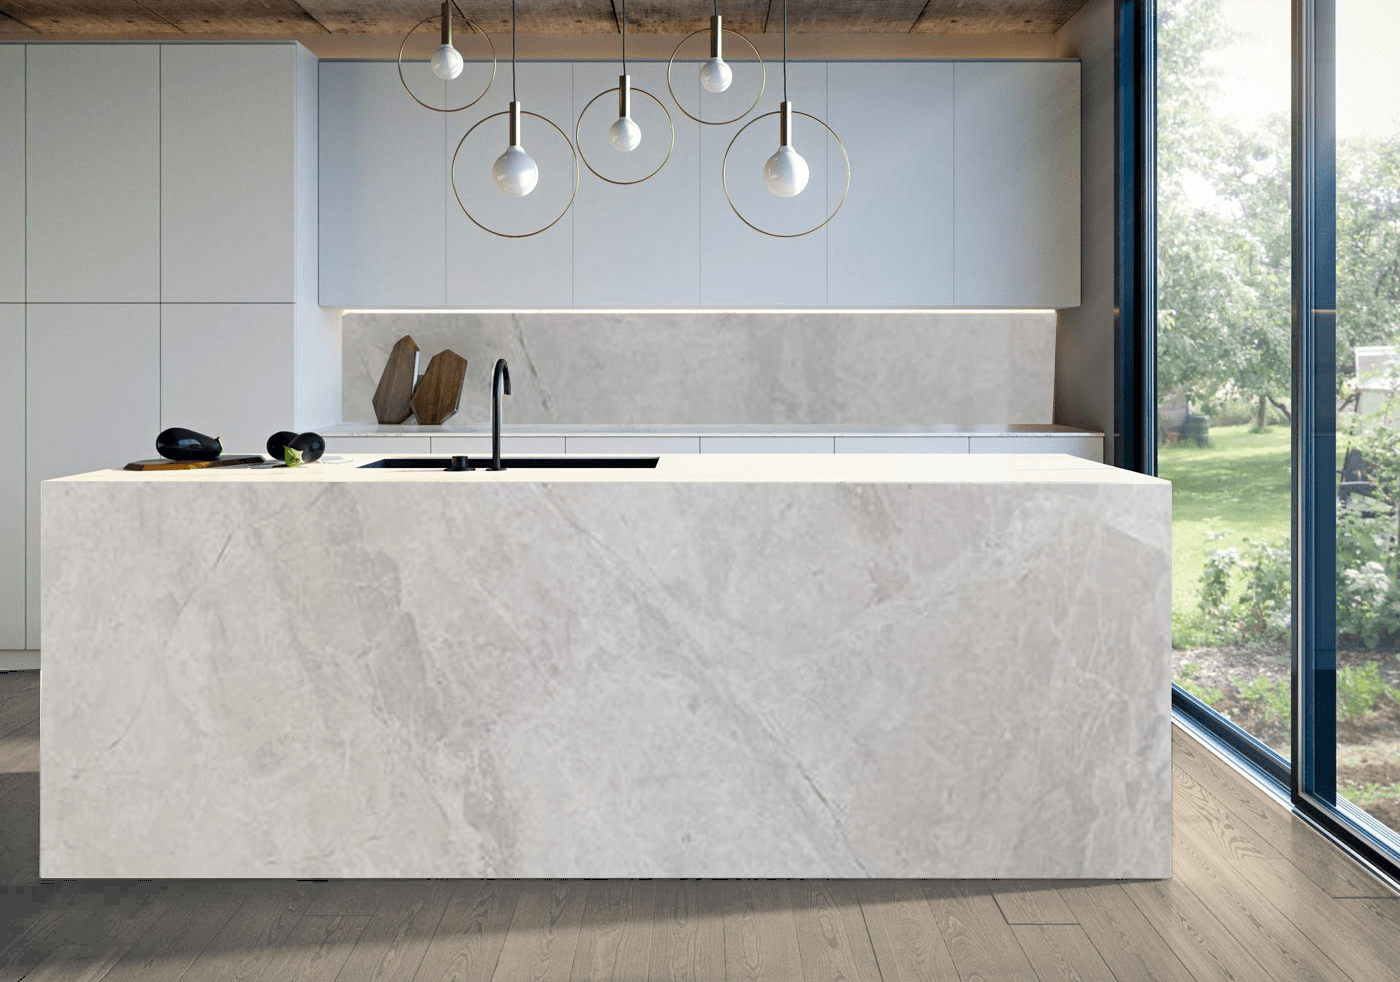 Are You Looking for Similar Veined Marble Patterns in Varying Shades